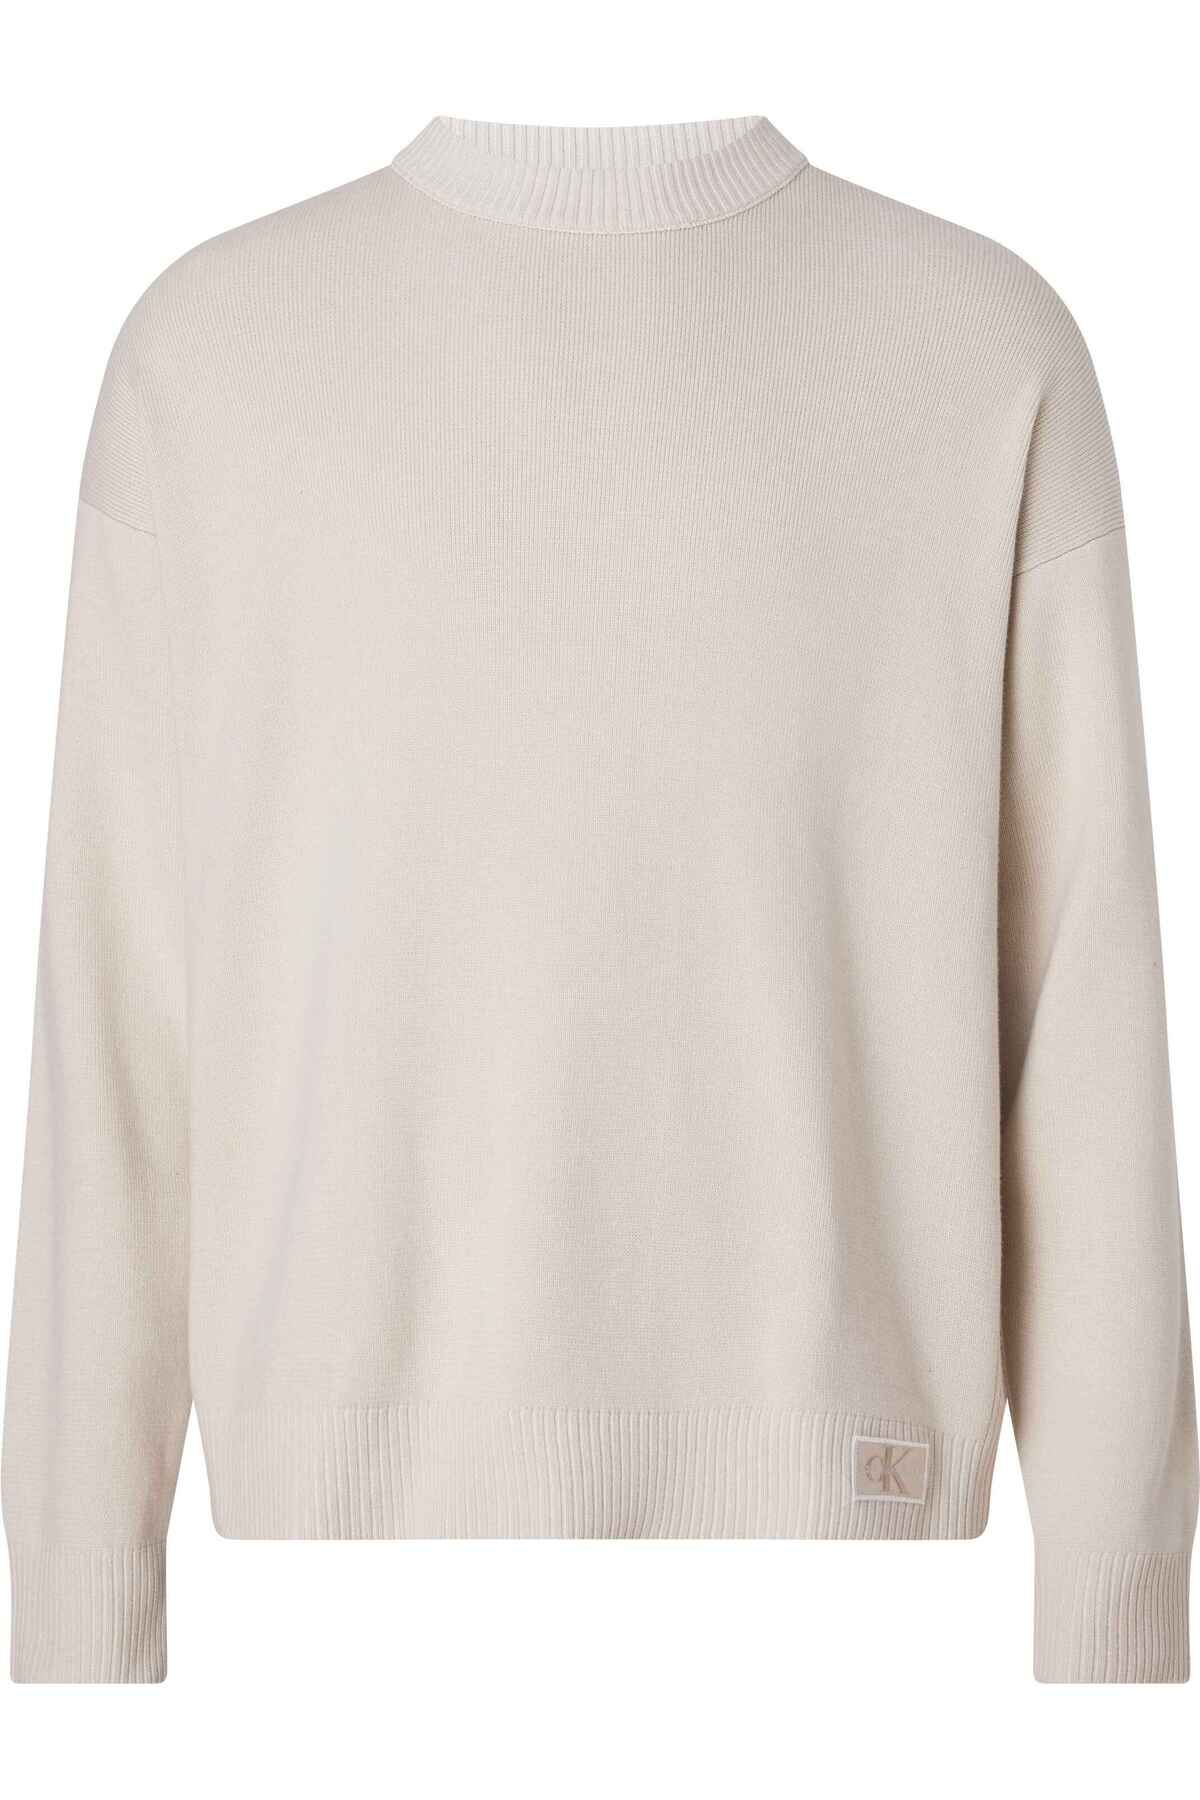 Calvin Klein BADGE PLATED LOOSE SWEATER